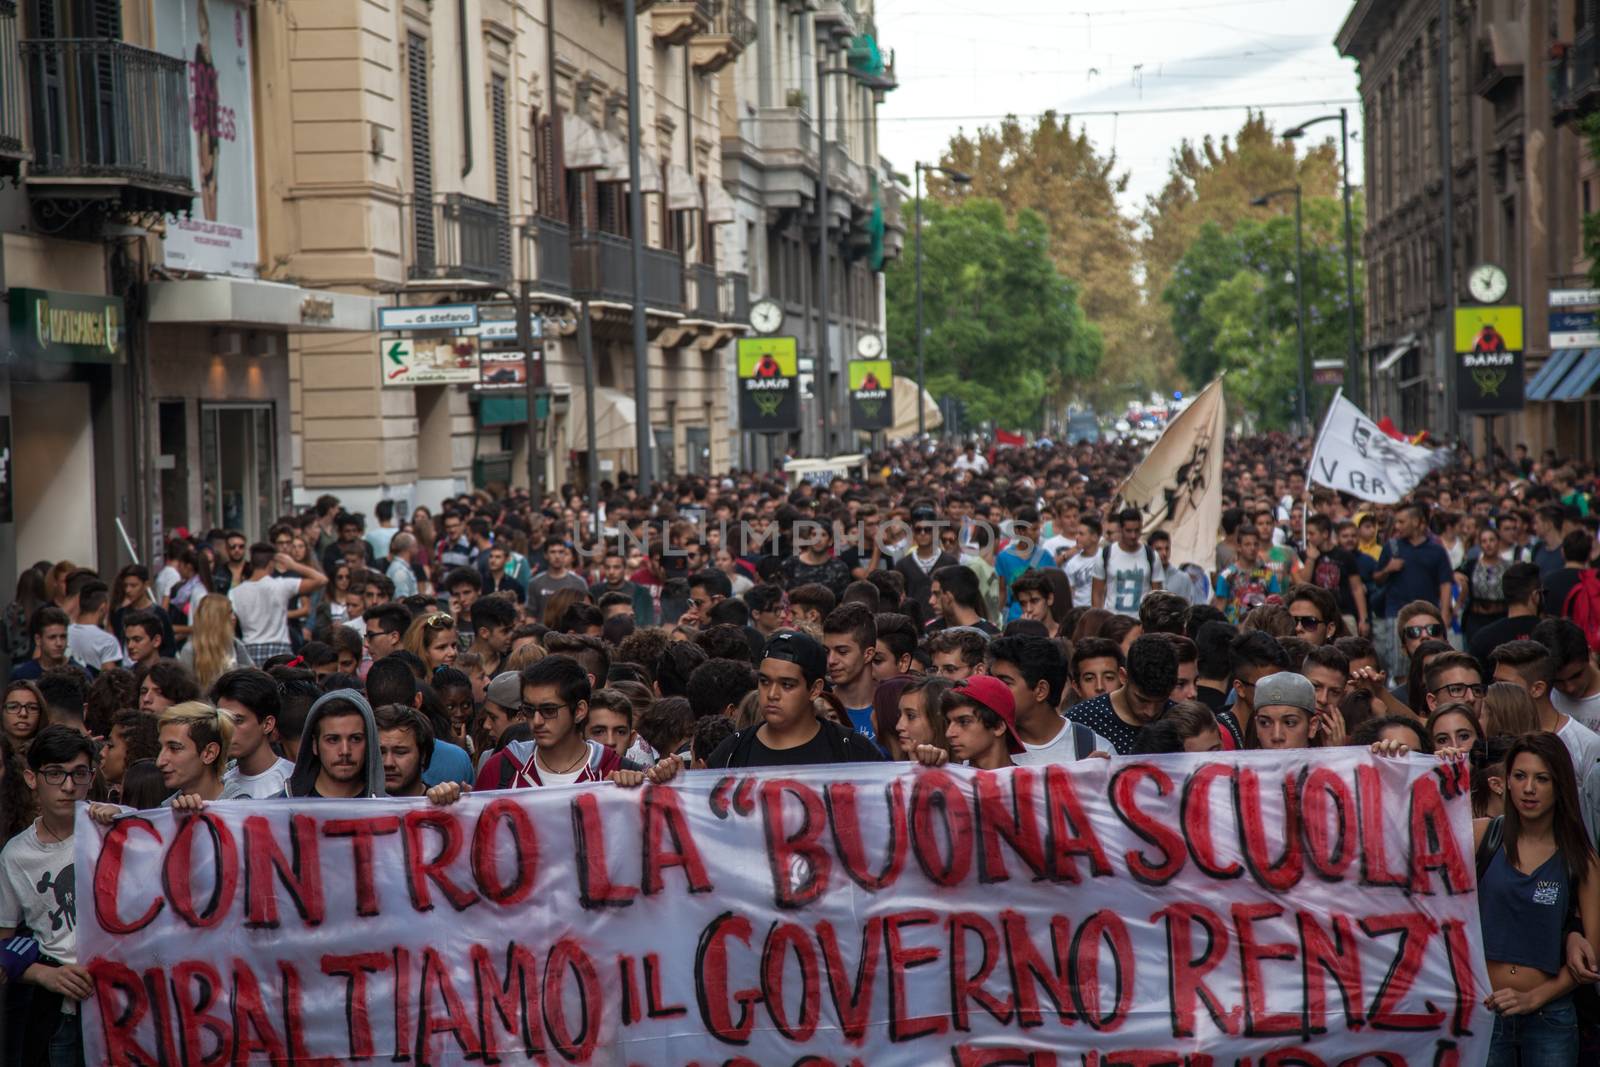 ITALY, Palermo: Thousands of students marched and held banners against Renzi's school reform in Palermo, Italy on October 9, 2015.A theme of the protests is the revisions to the calculation of family income, which some say will reduce scholarships and housing for students. Students throughout the country protested what's know as La Buona Scuola.  A spokesman for the protesters said they were going to announce a week of mobilization lasting until October 17. They plan to launch an attack for free education and reversal of policies. 